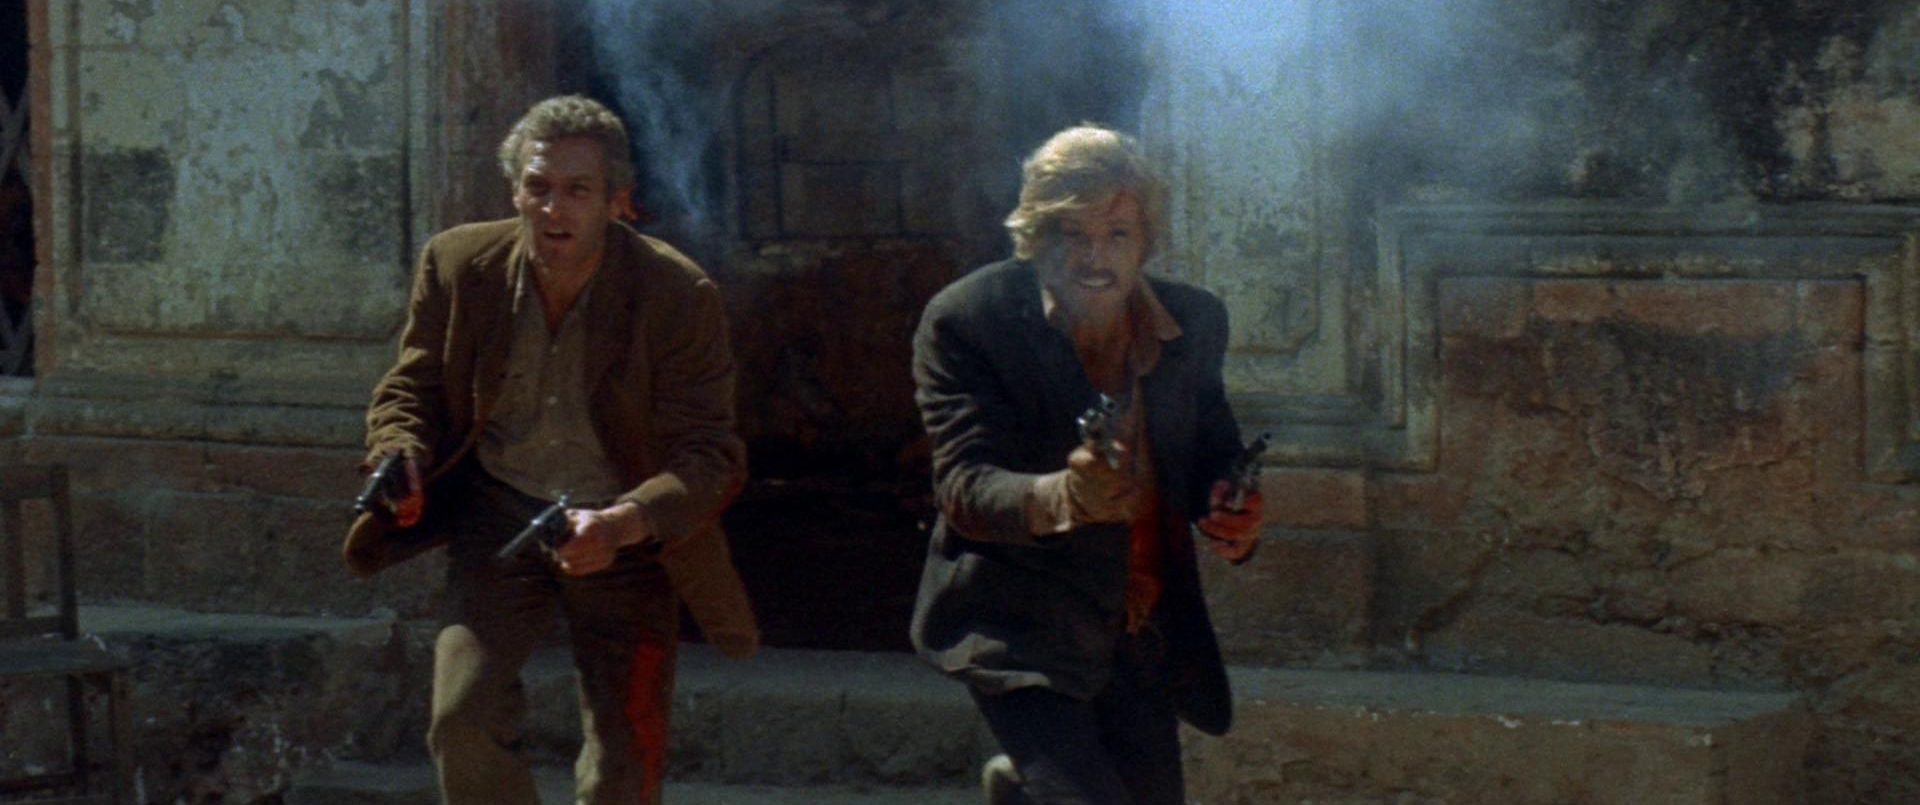 Paul Newman and Robert Redford as Butch Cassidy and the Sundance Kid with guns drawn in the middle of a shootout.